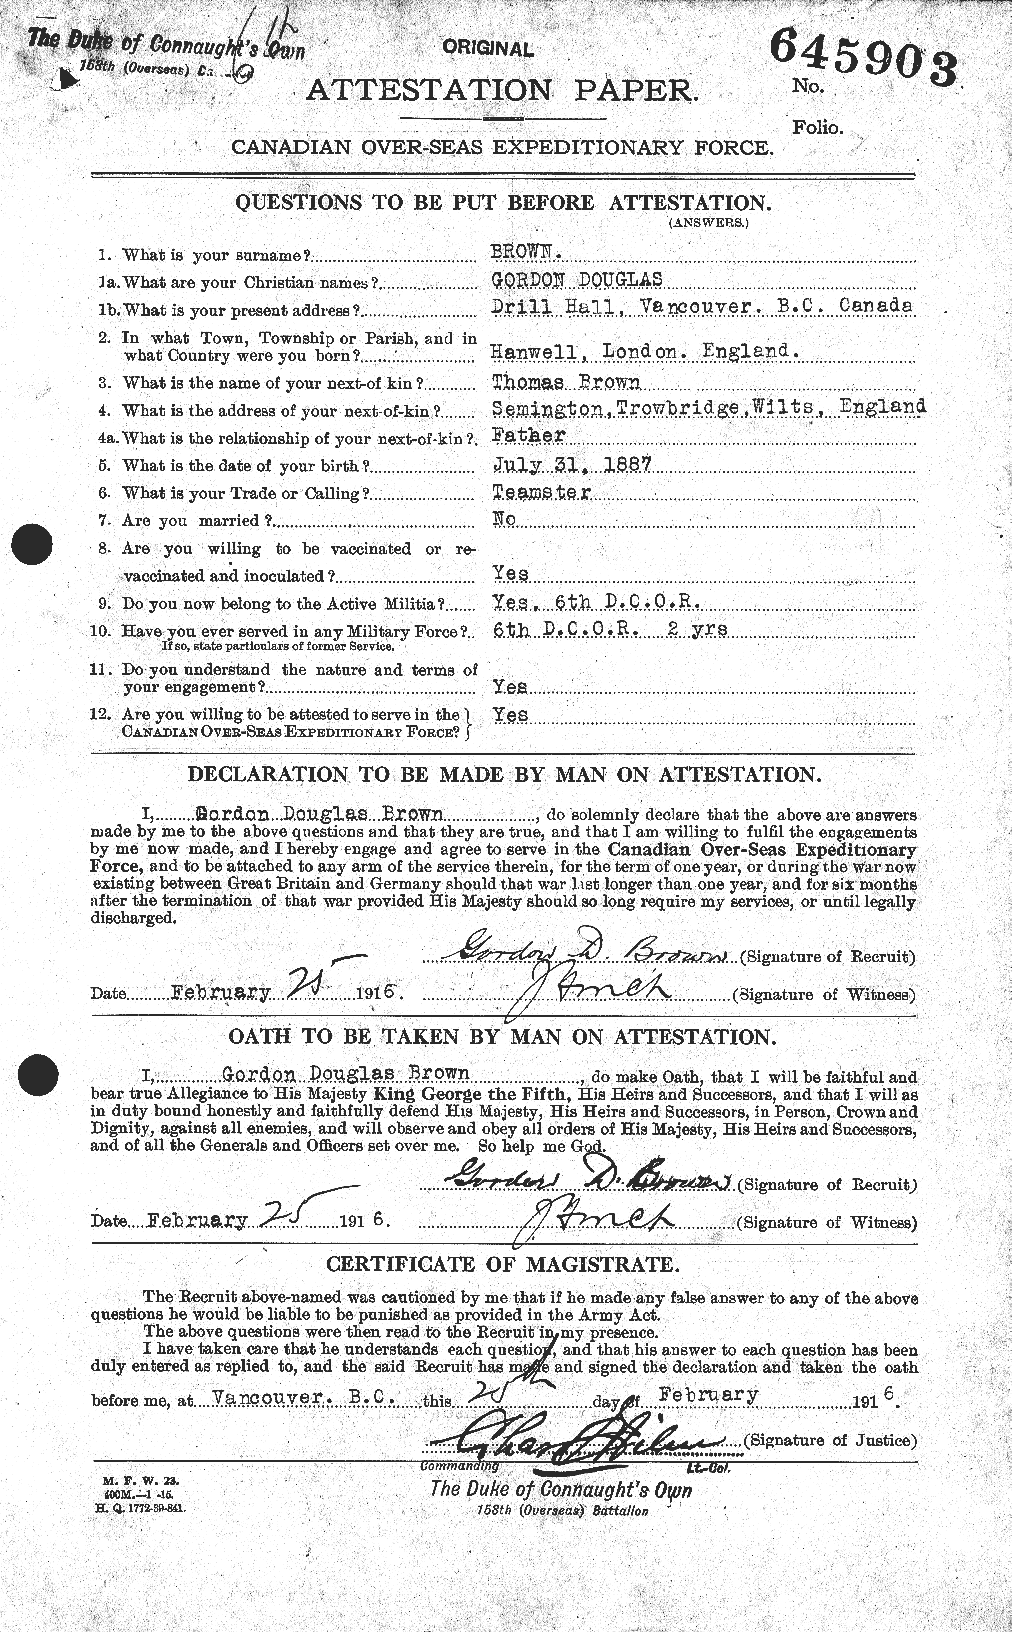 Personnel Records of the First World War - CEF 262632a